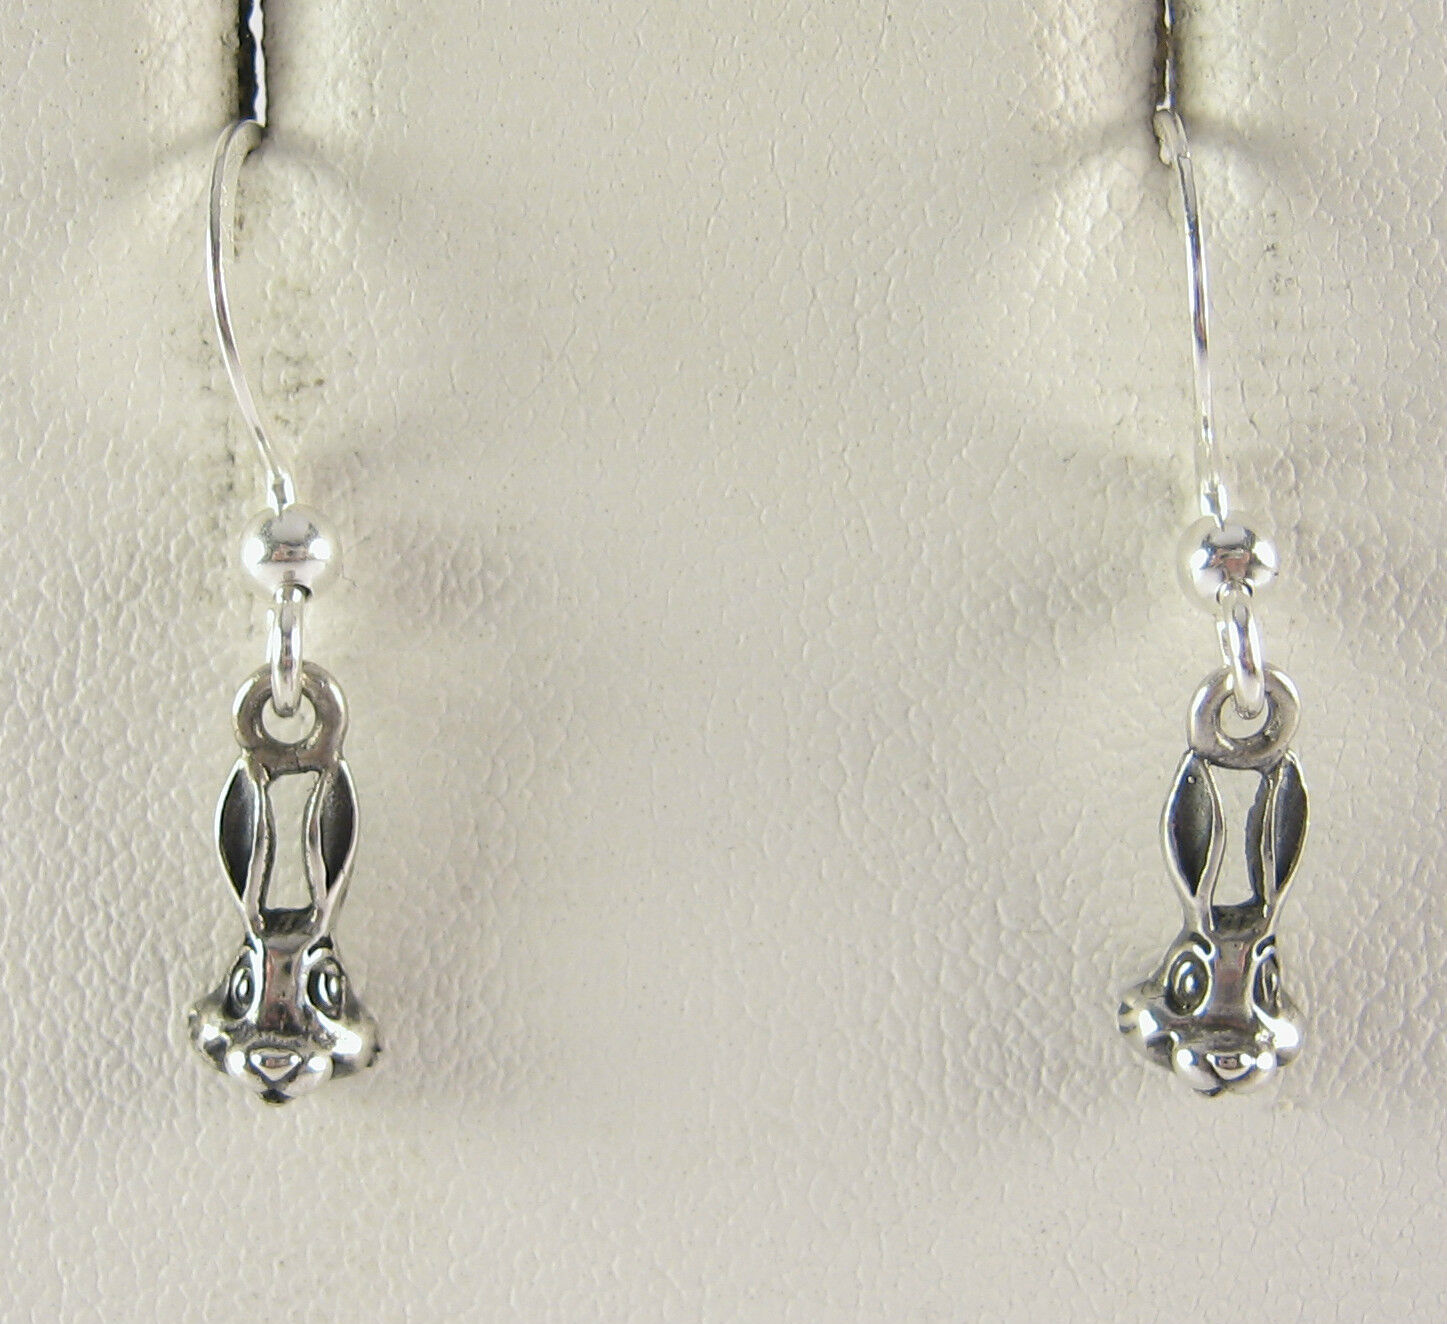 Miniature Bunny Rabbit Dangle Earrings 925 Sterling Silver Easter Gift USA Made